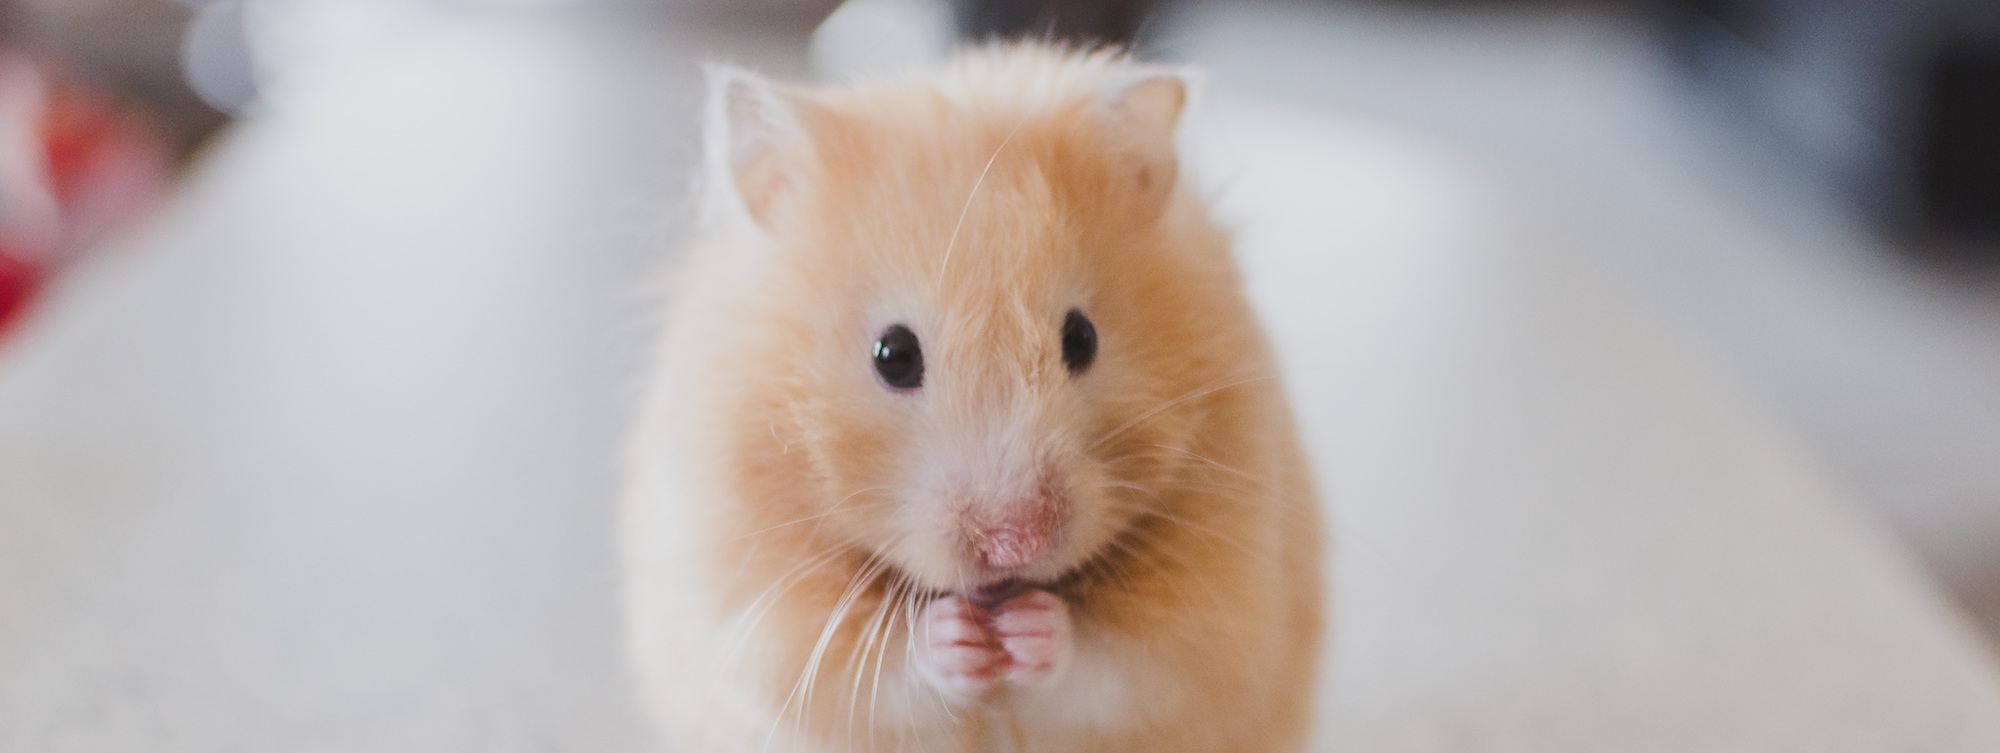 A small animal like a gerbil doesn't require any grooming or bathing